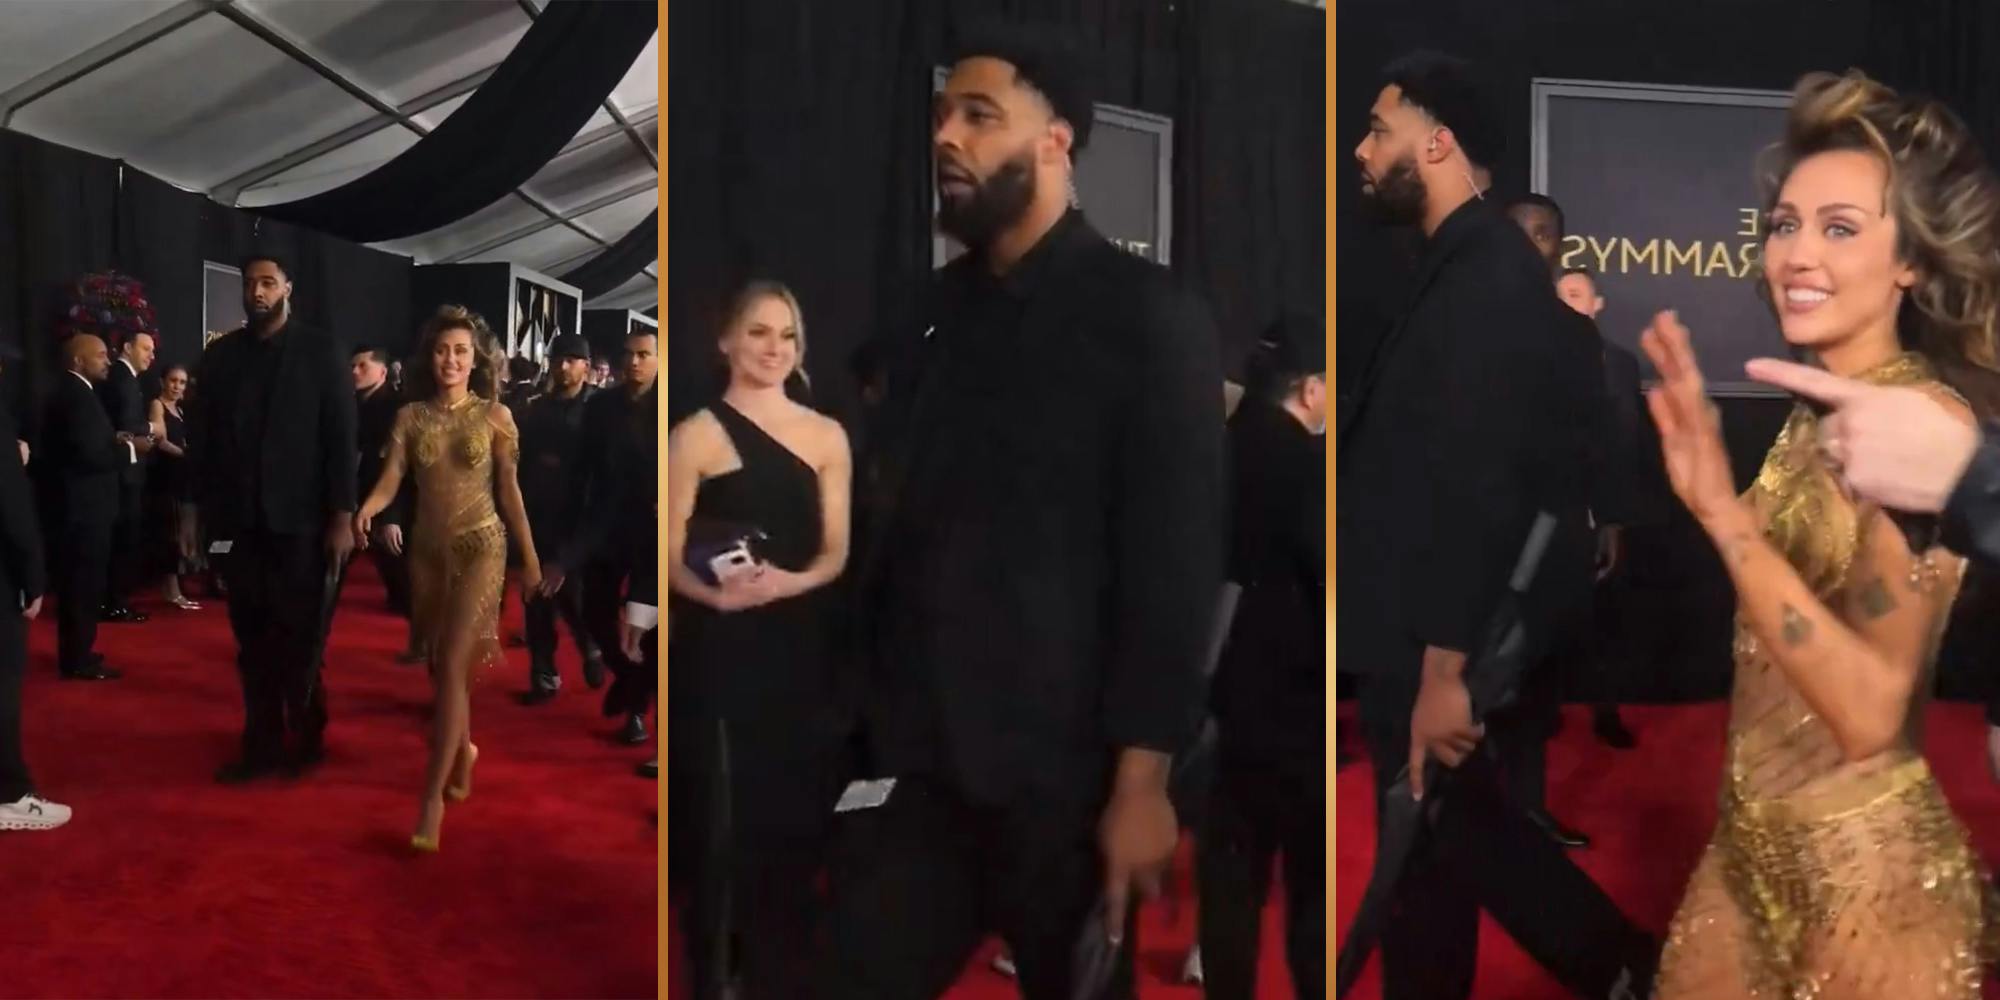 Video of Miley Cyrus' bodyguard at Grammys prompts conspiracy